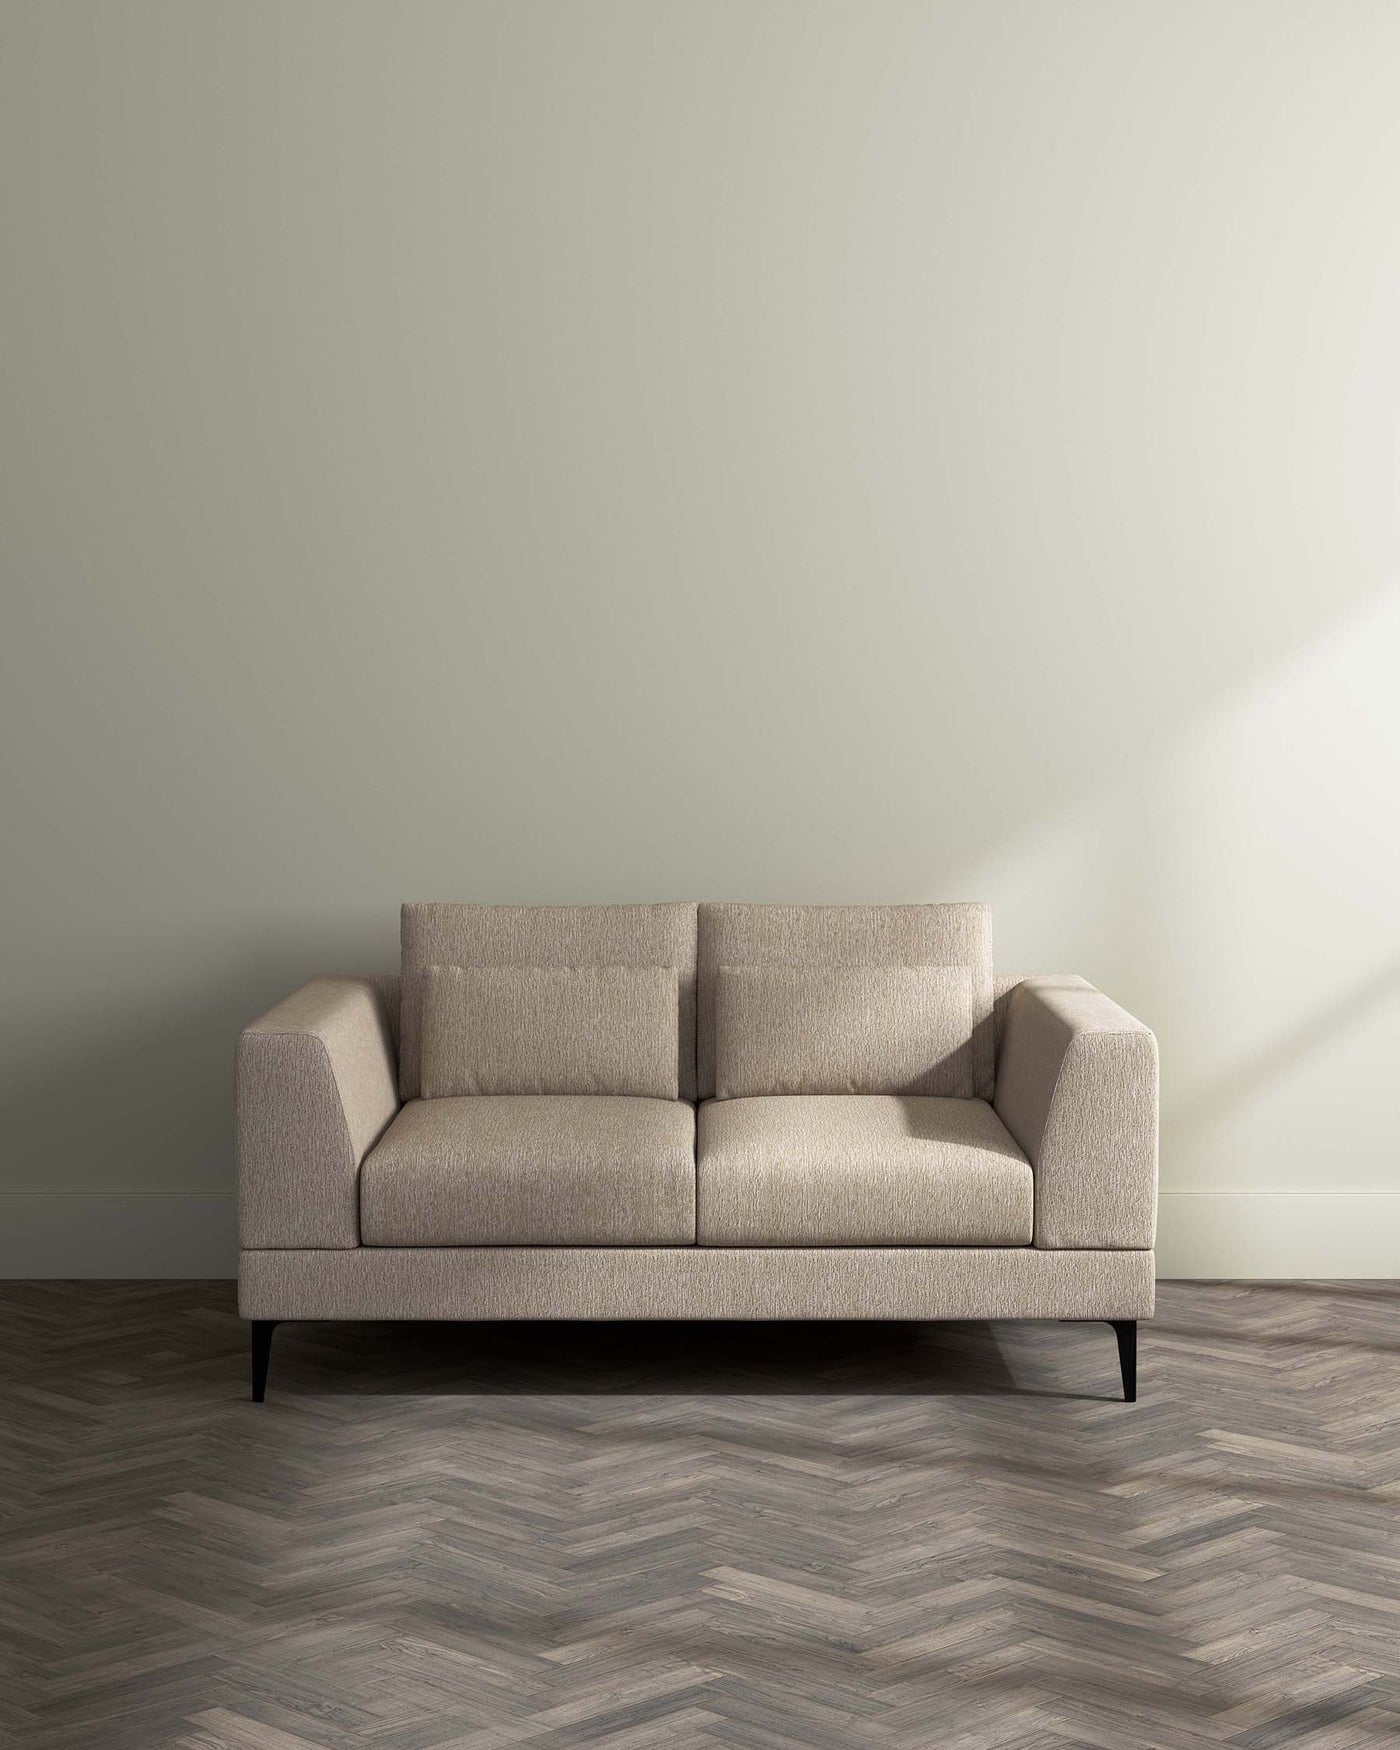 Minimalist beige fabric sofa with clean lines and dark wooden legs set against a neutral wall on a herringbone-patterned wooden floor.